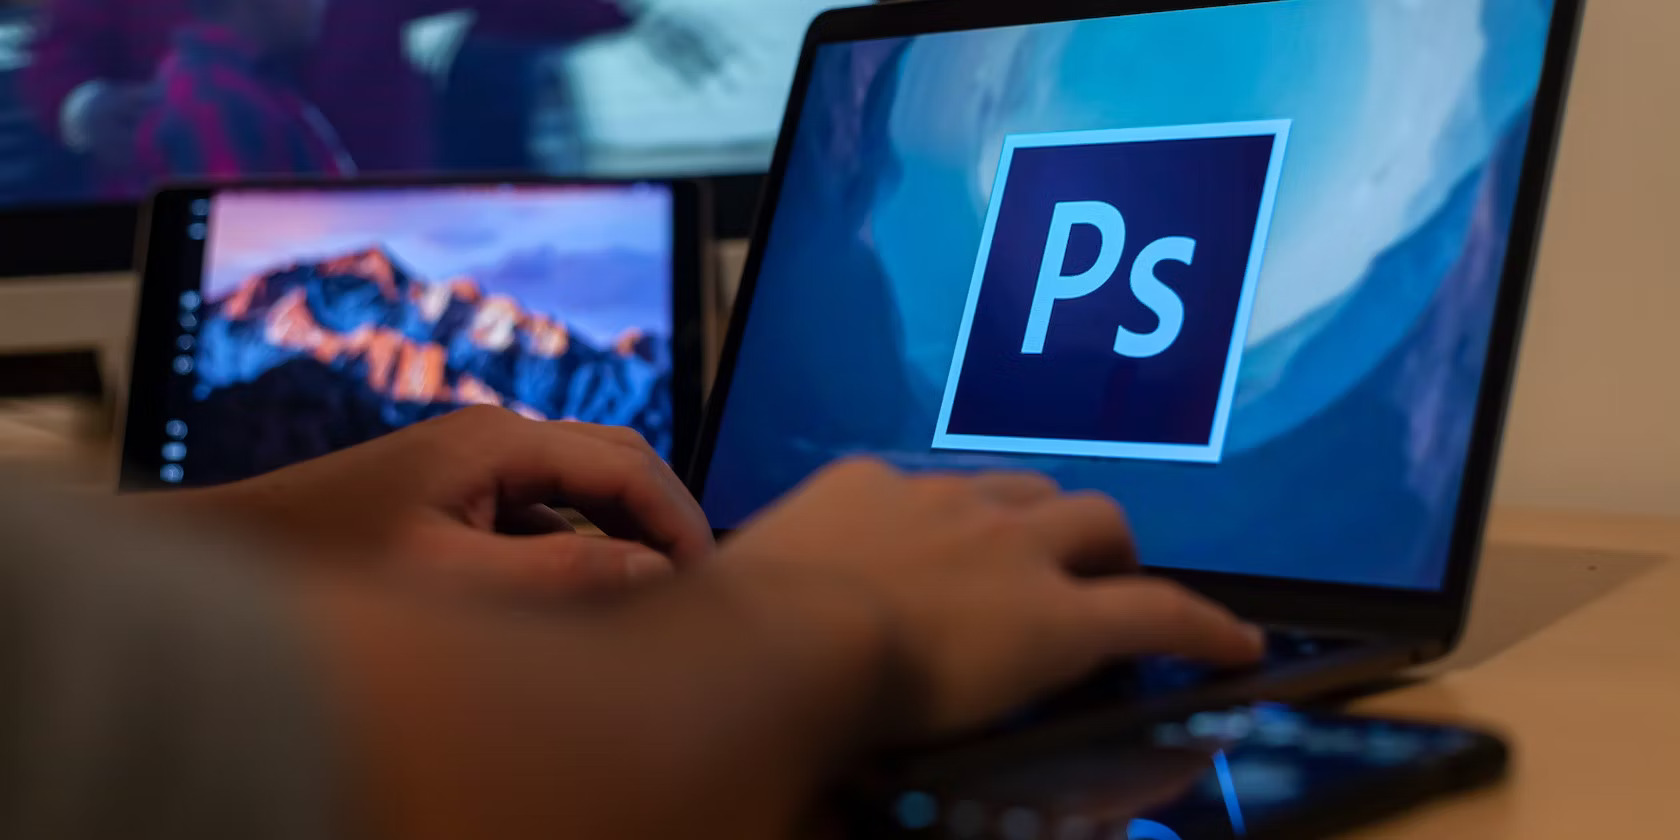 How Many Computers Can I Install Photoshop On?